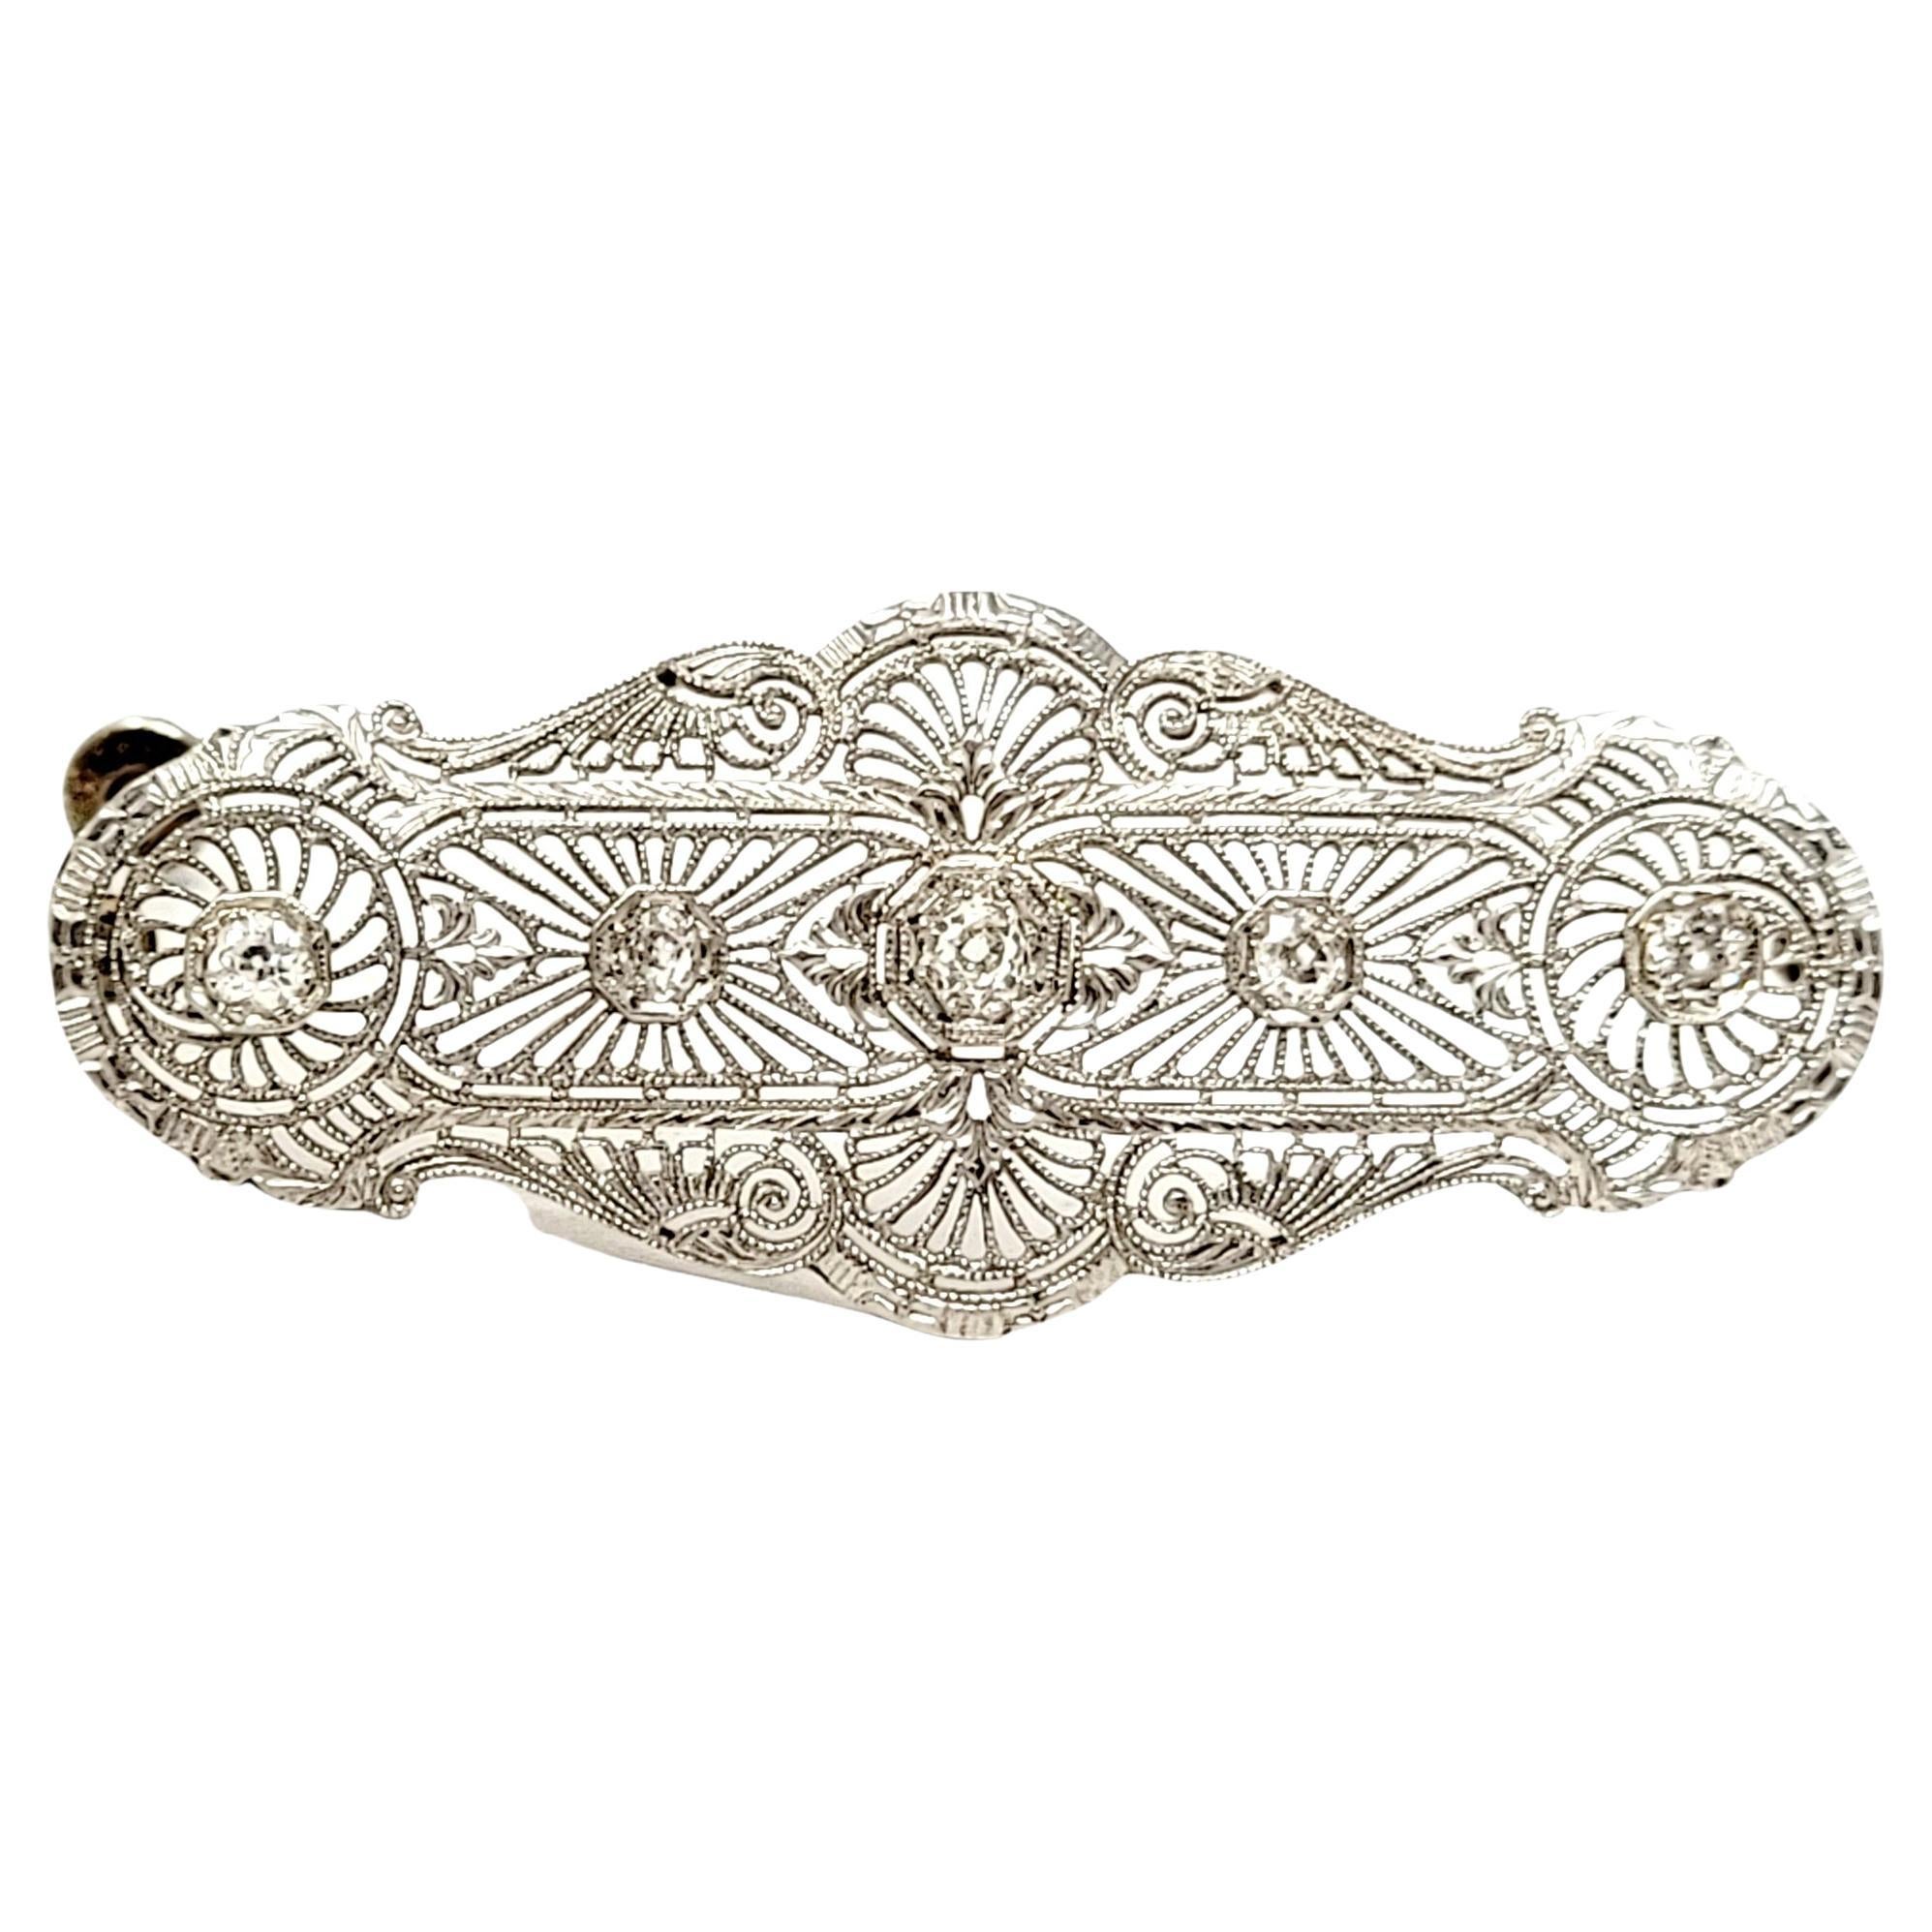 Lovely vintage diamond brooch with delicate open filigree design throughout. 

Metal: 14K White Gold
Closure: Hinged stick pin
Natural Diamonds: .45 ctw 
Diamond Cut: Old Mine
Diamond Color: G-H-I
Diamond Clarity: VS2-I1
Length: 2.16